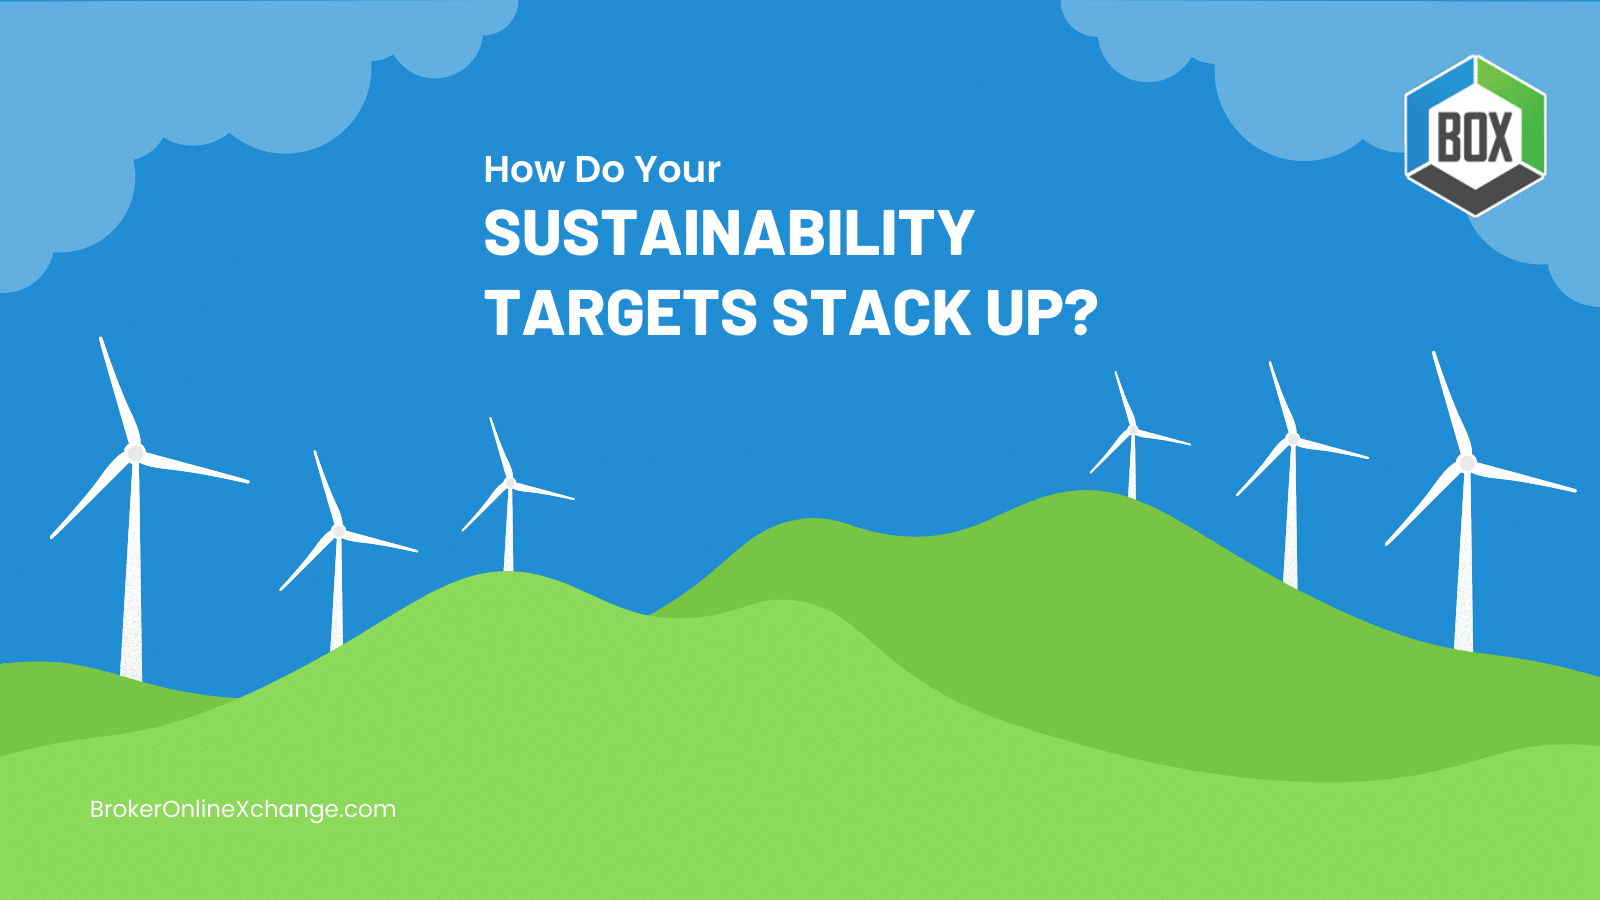 BOX How do your sustainability targets stack up?